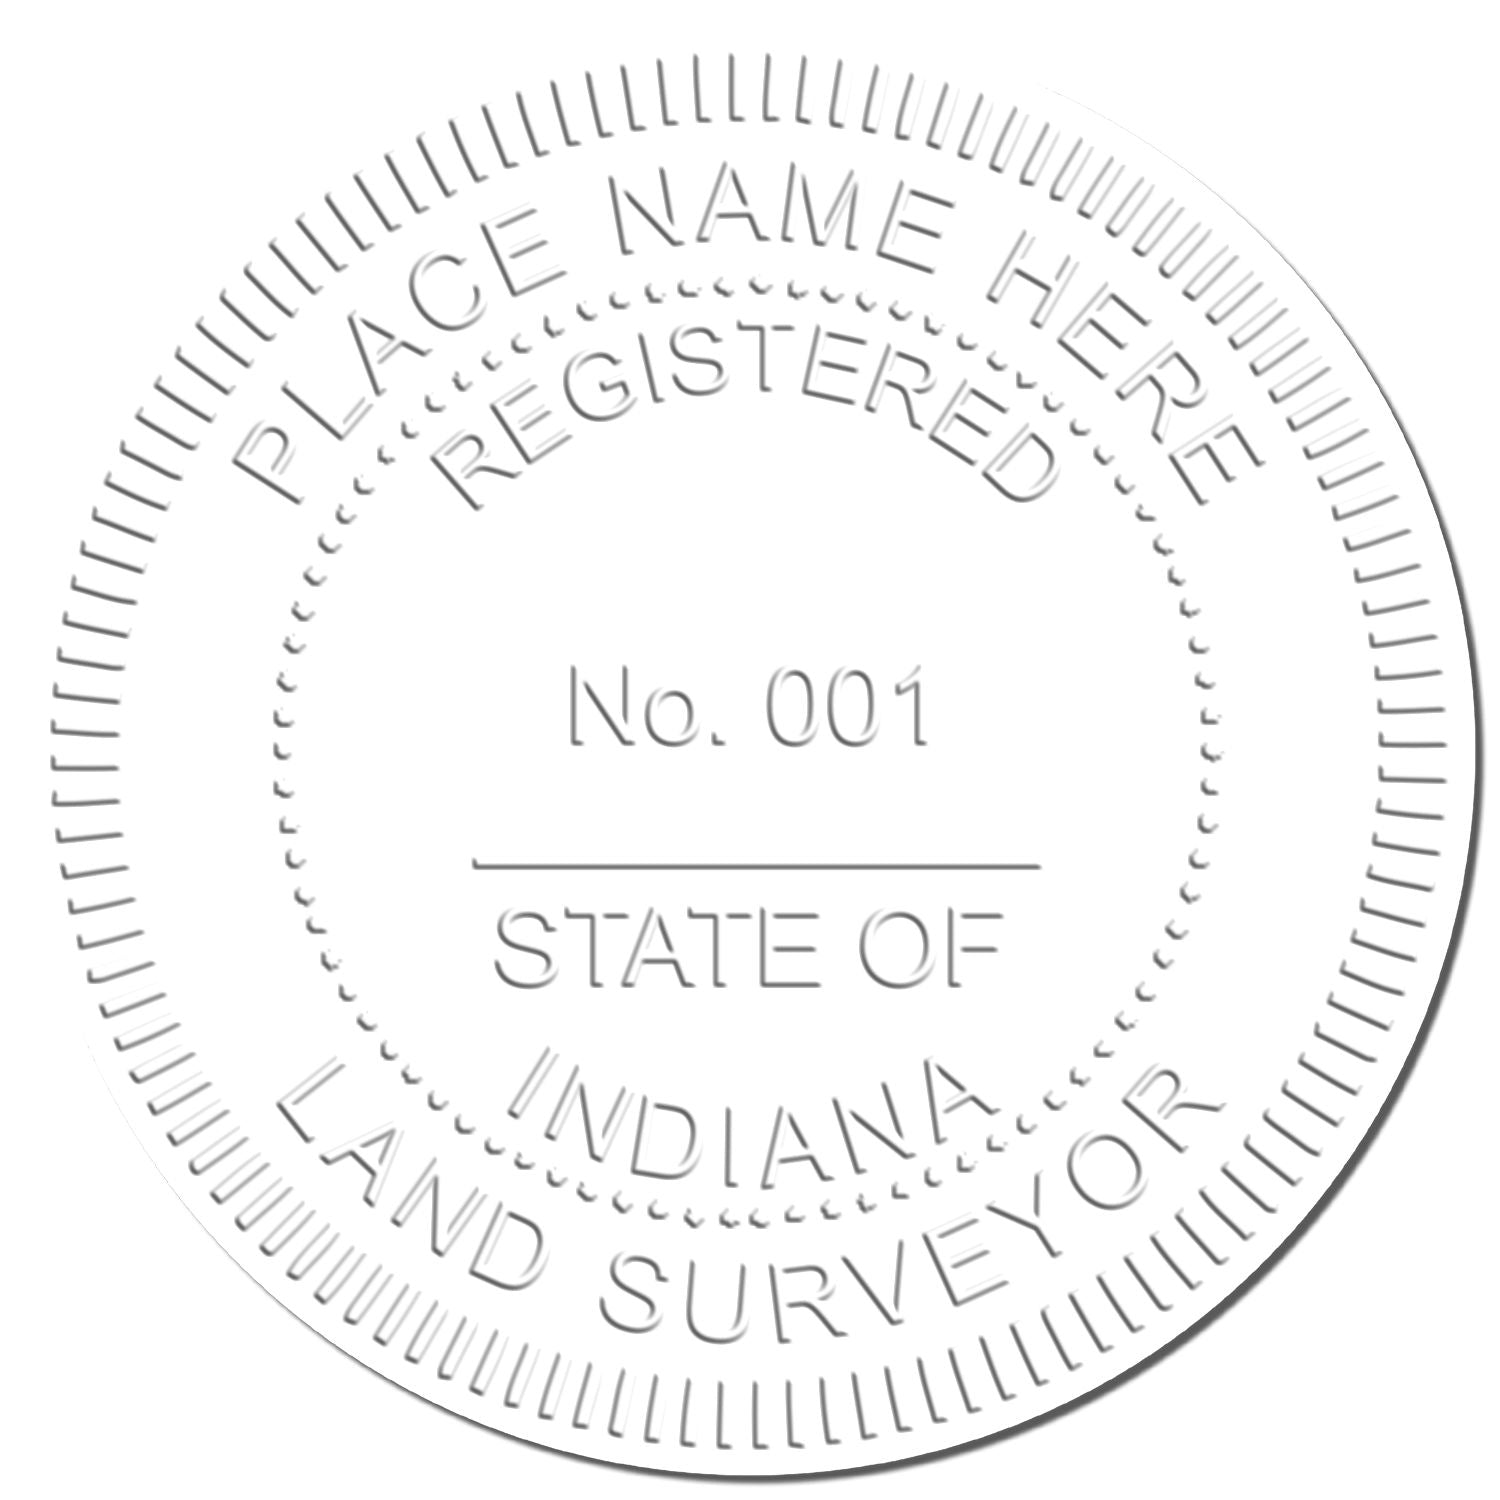 The main image for the Long Reach Indiana Land Surveyor Seal depicting a sample of the imprint and electronic files